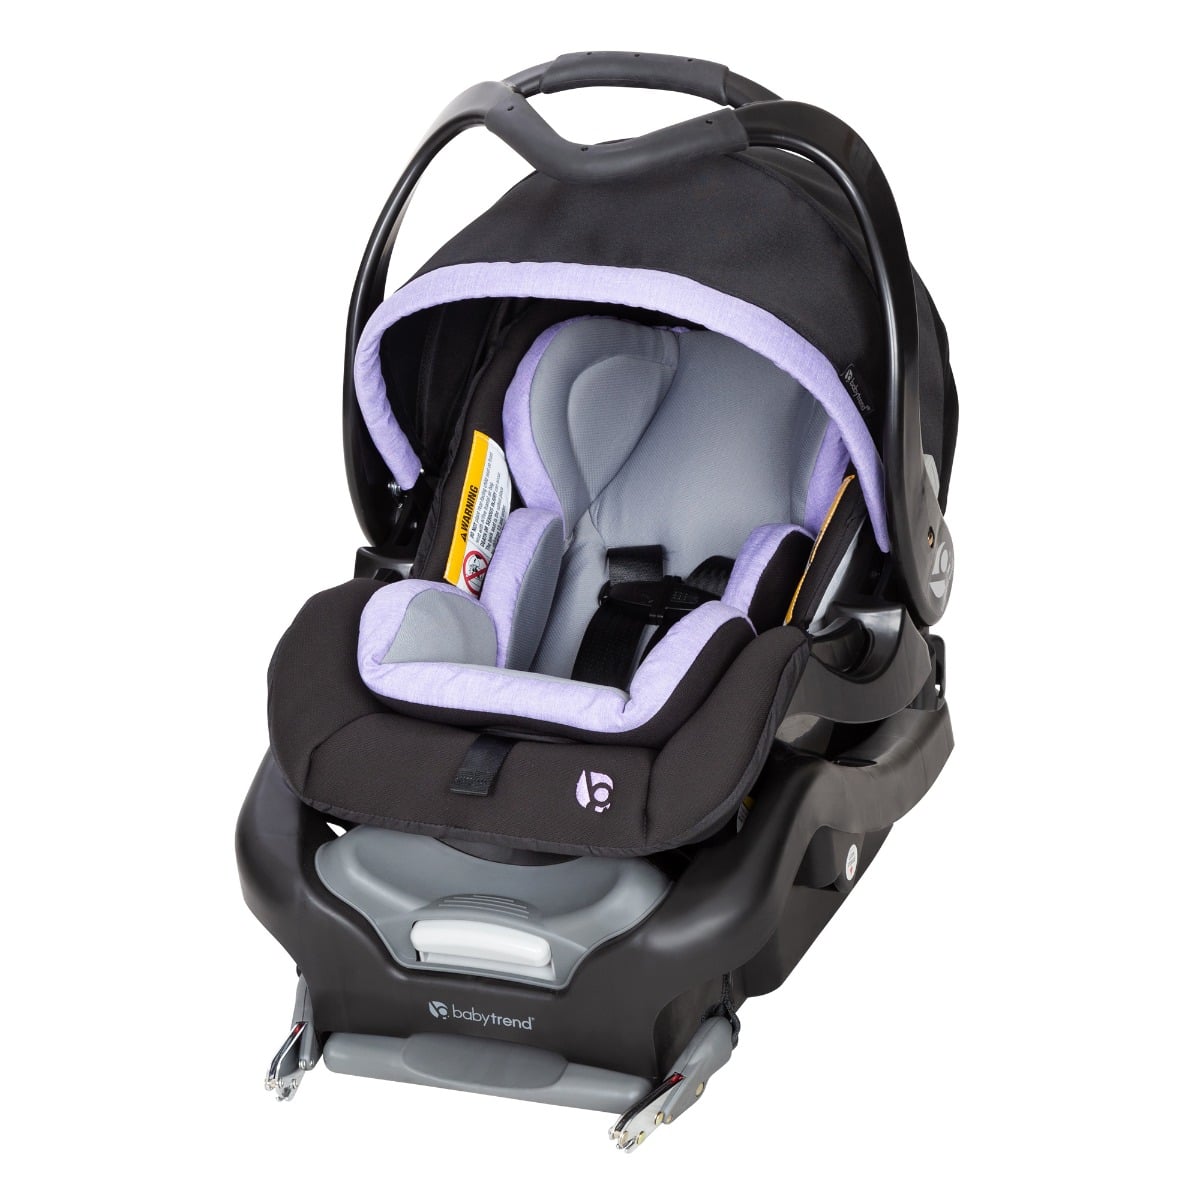 Baby Trend Secure Snap Tech 35 infant car seat for baby girl